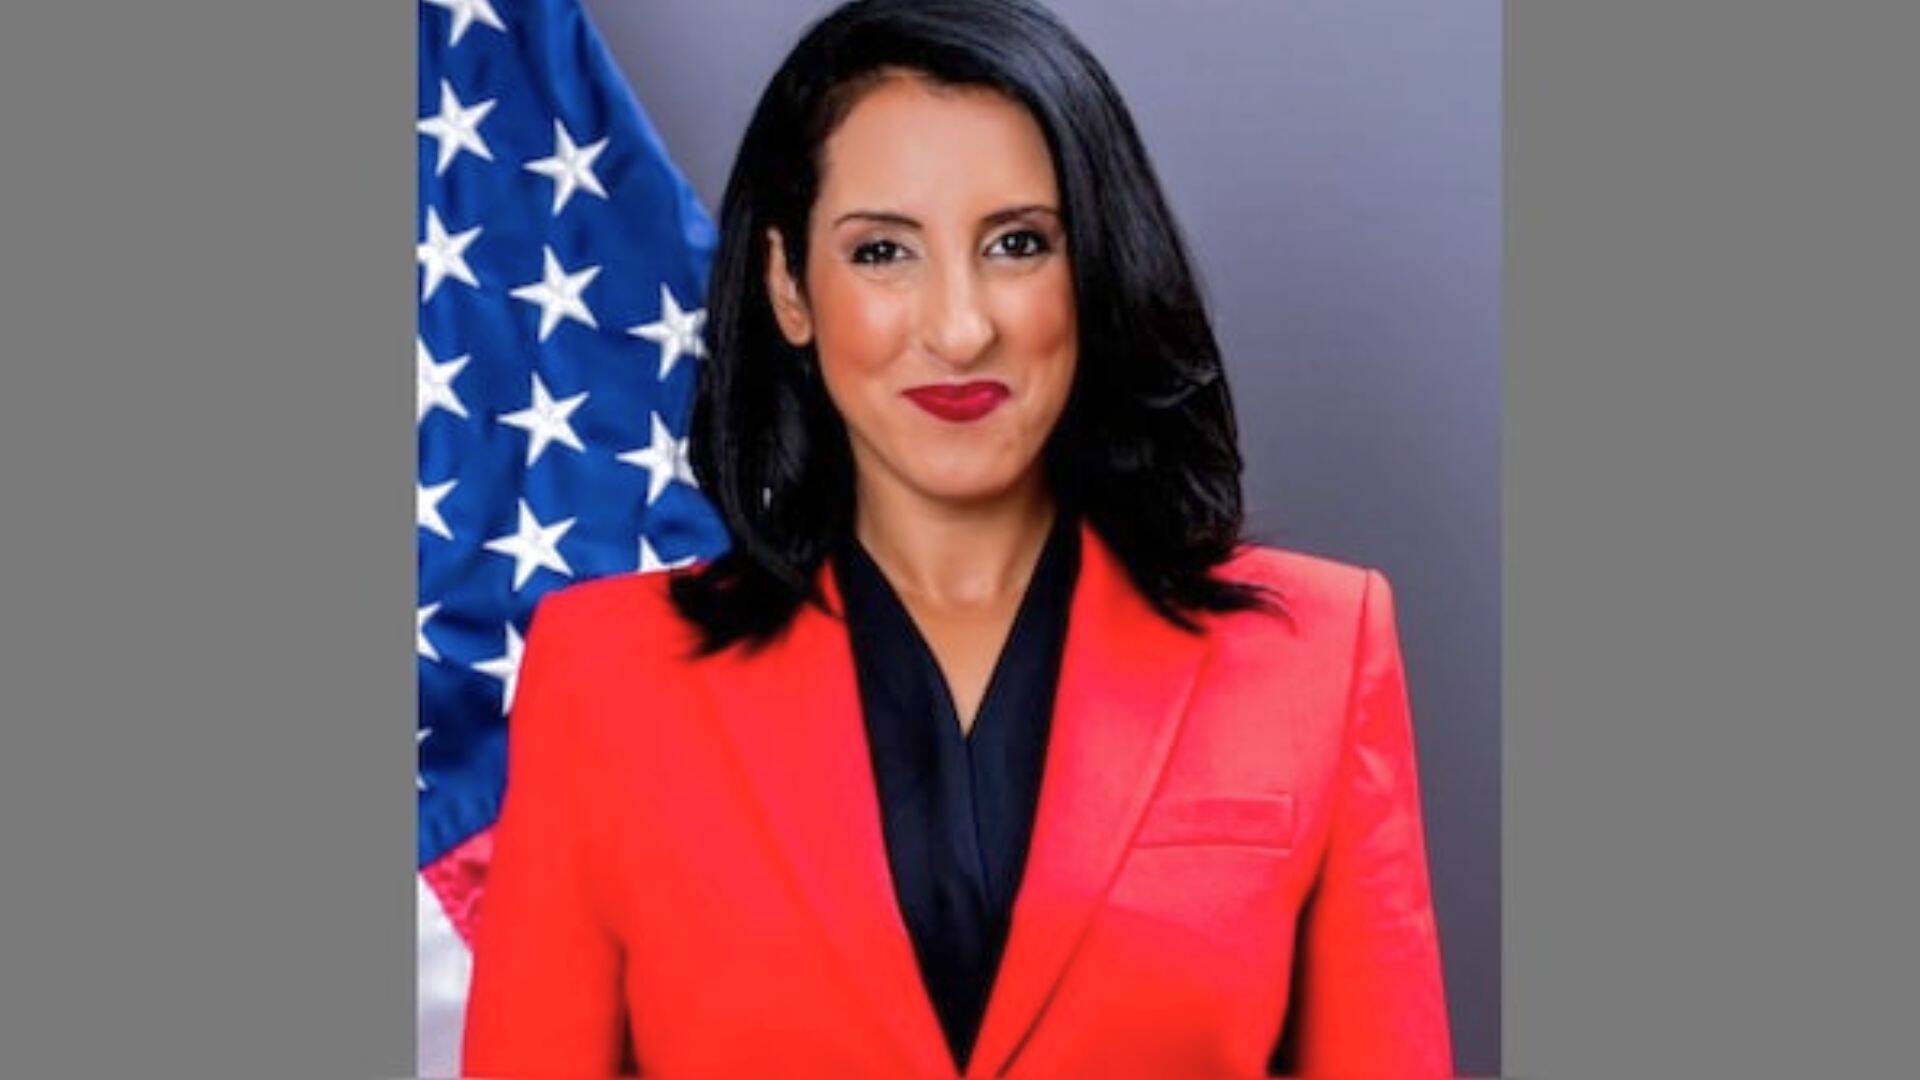 Hala Rharrit served as an Arabic language spokesperson for the Department of State at the time of her resignation